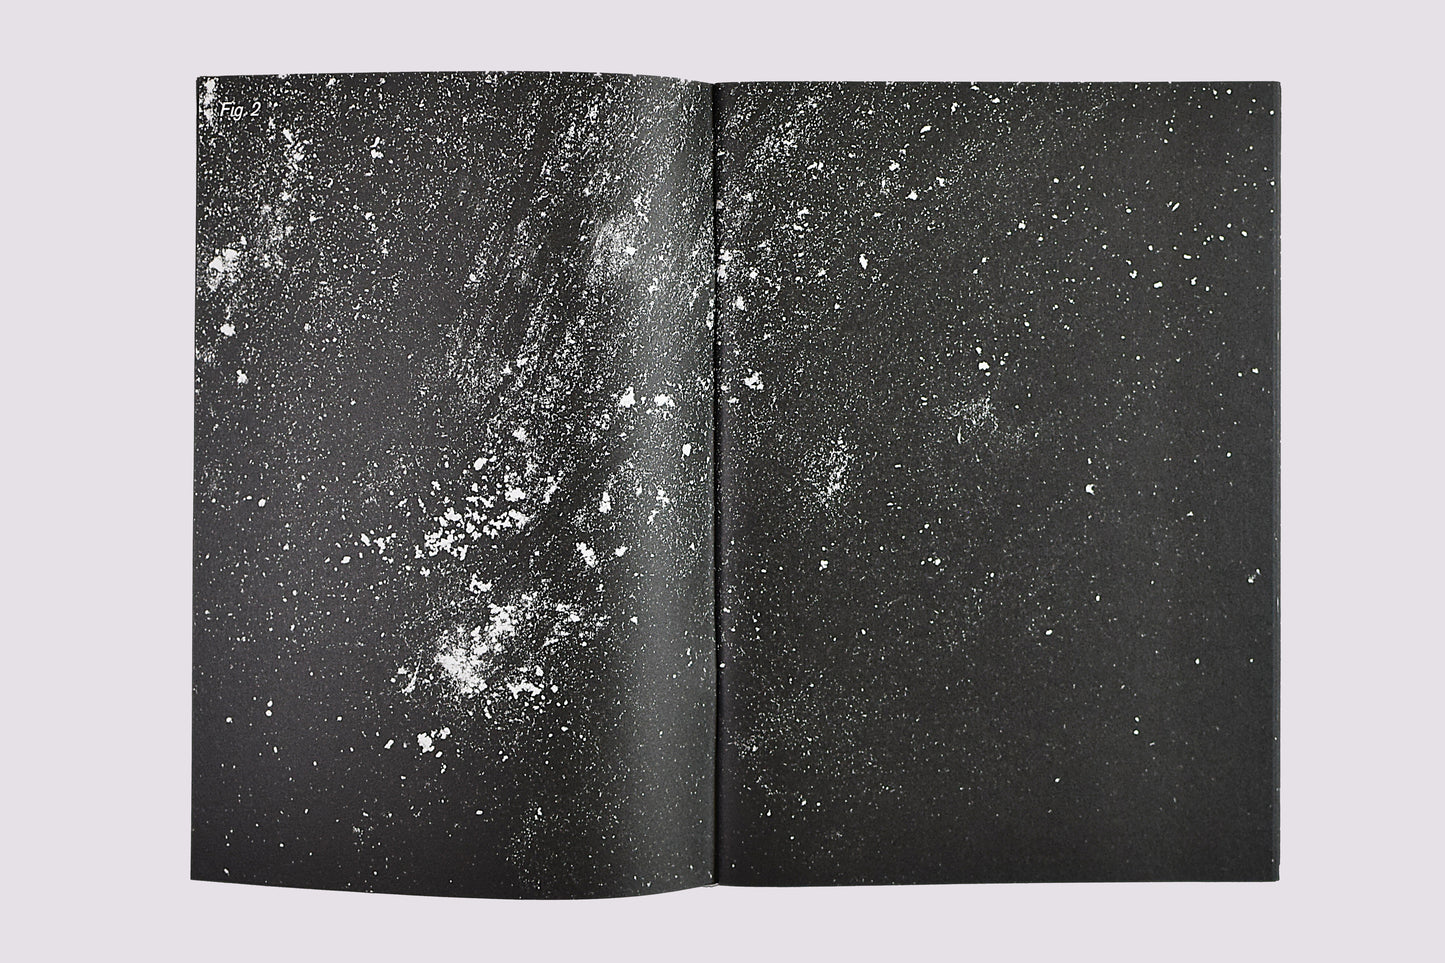 Into Dust/Jams Tunks by Perimeter Editions